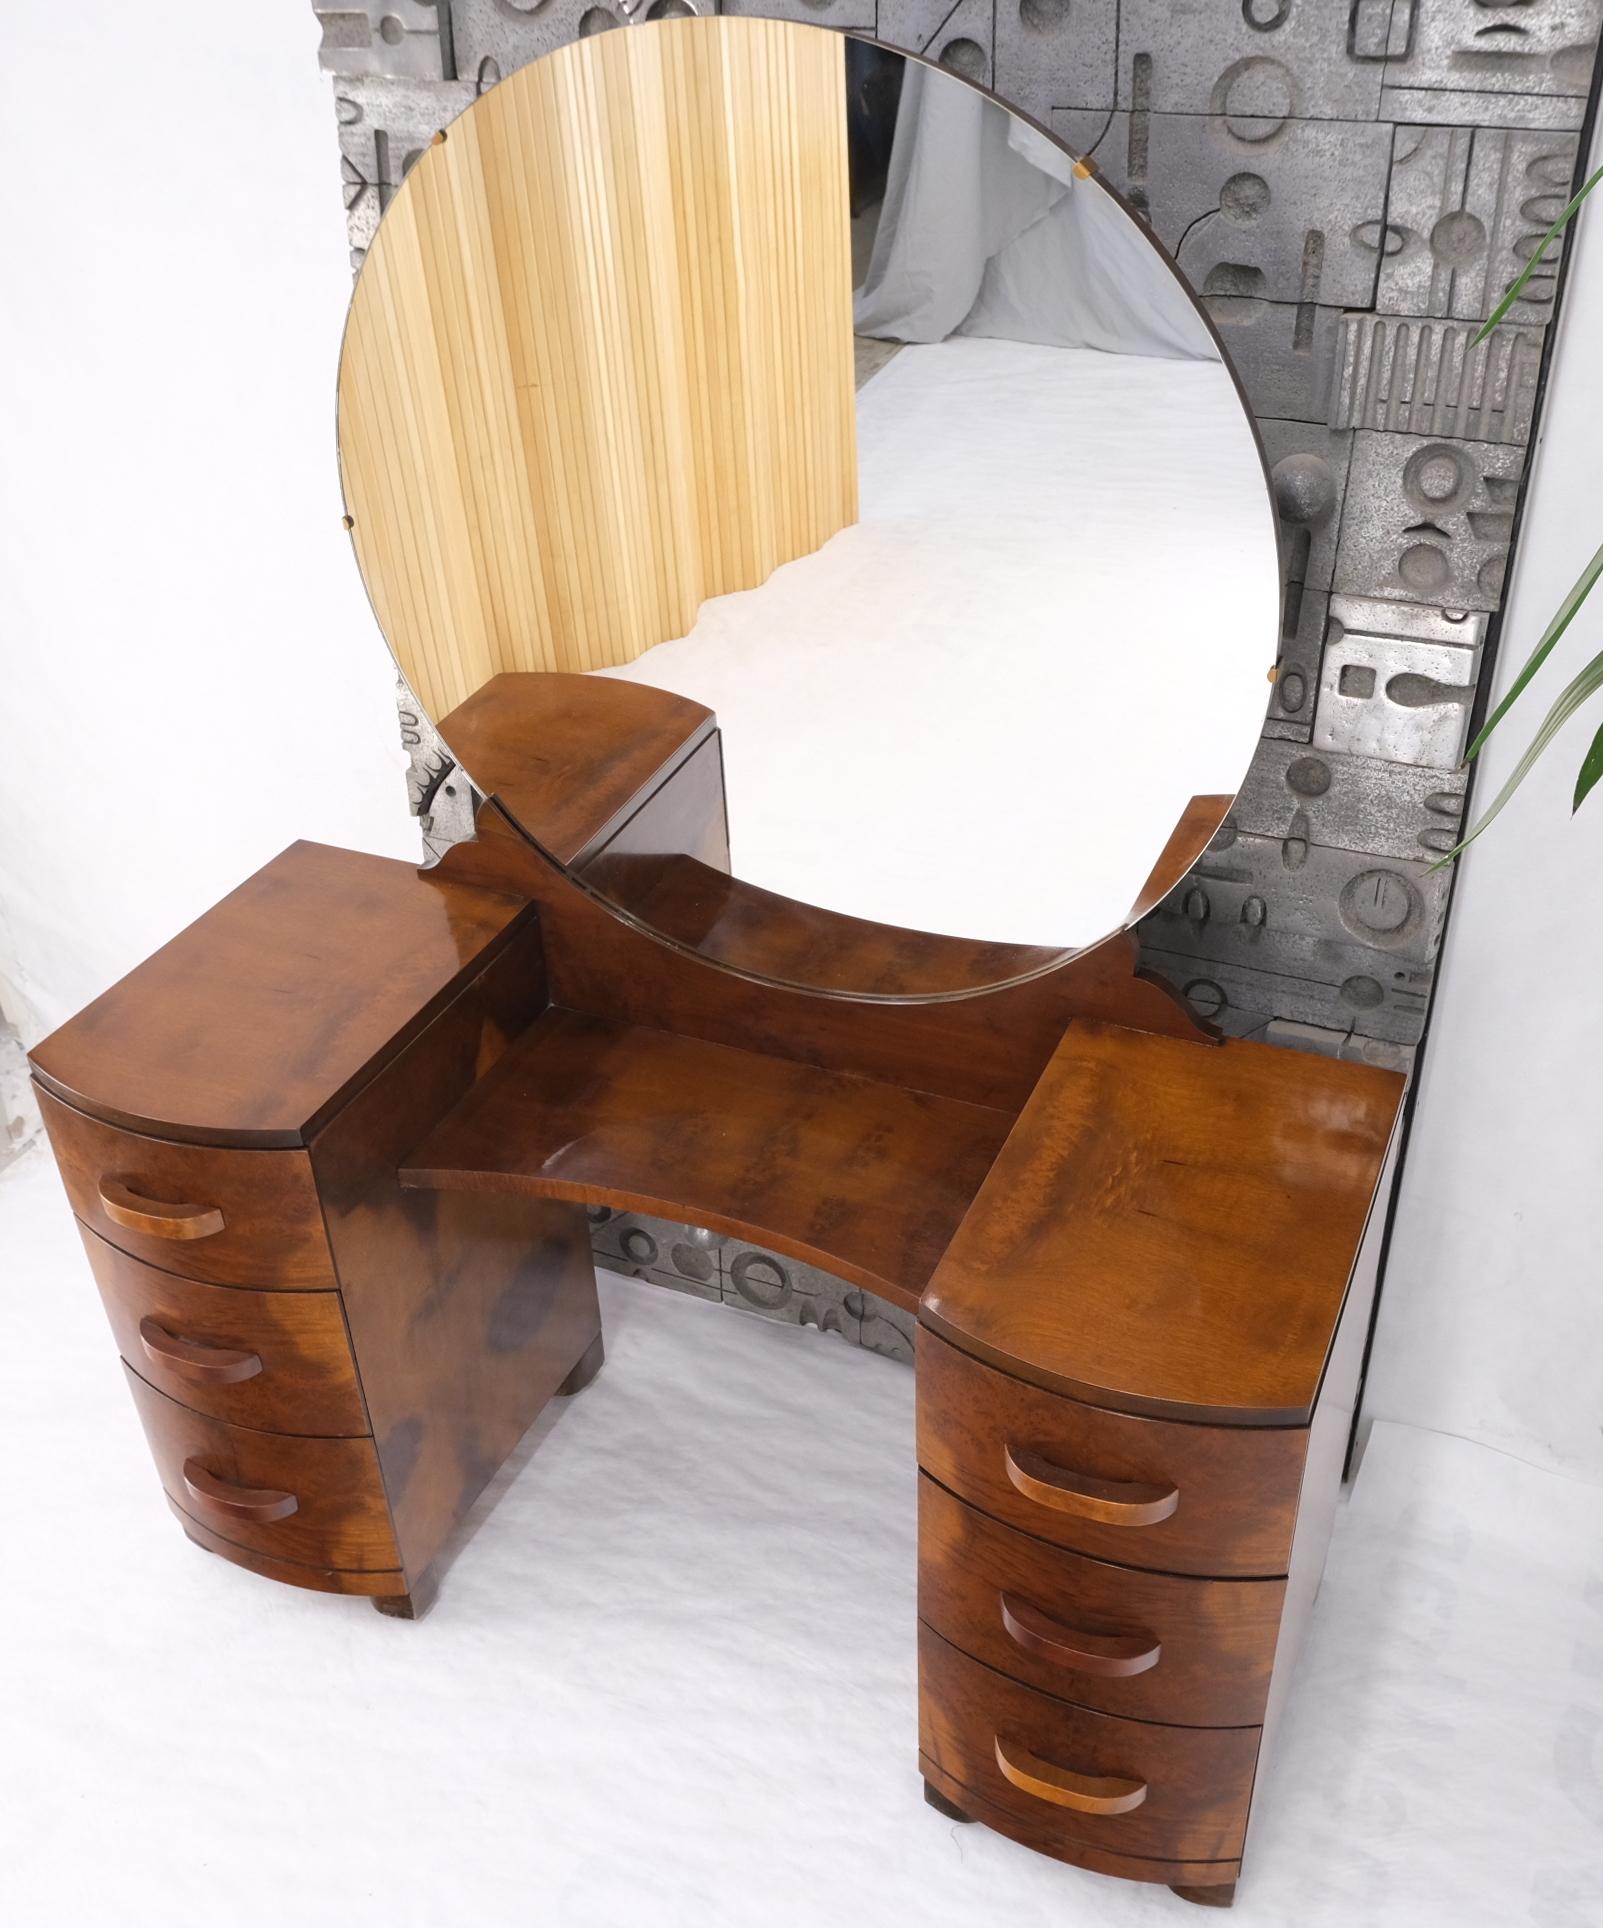 Bow Front Burl Wood Large Round Mirror Mid Century 6 Drawers Vanity Mint! 10